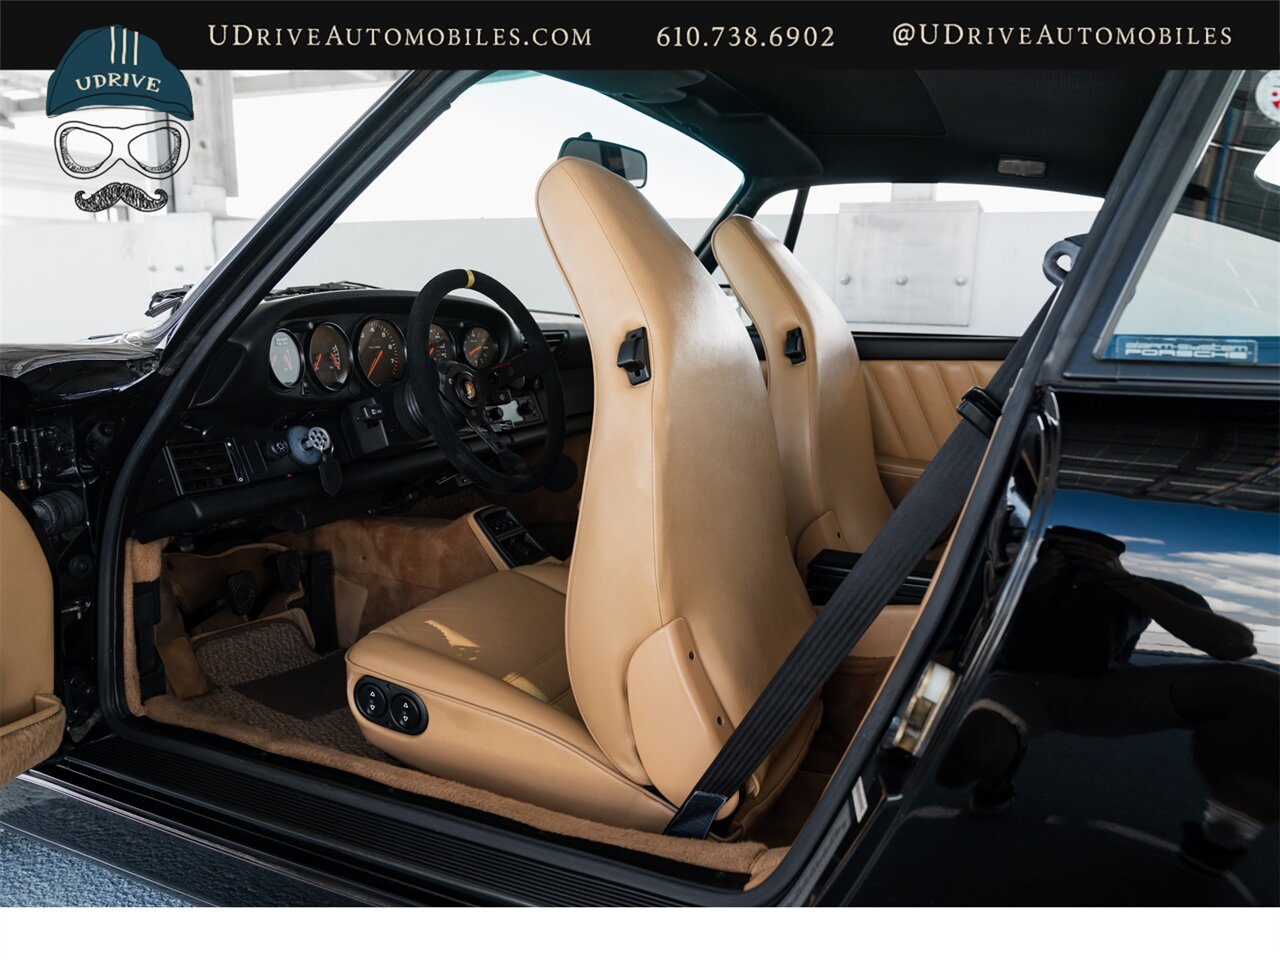 1989 Porsche 911 Carrera 4  964 C4 5 Speed Manual $63k Recent Service and Upgrades - Photo 49 - West Chester, PA 19382